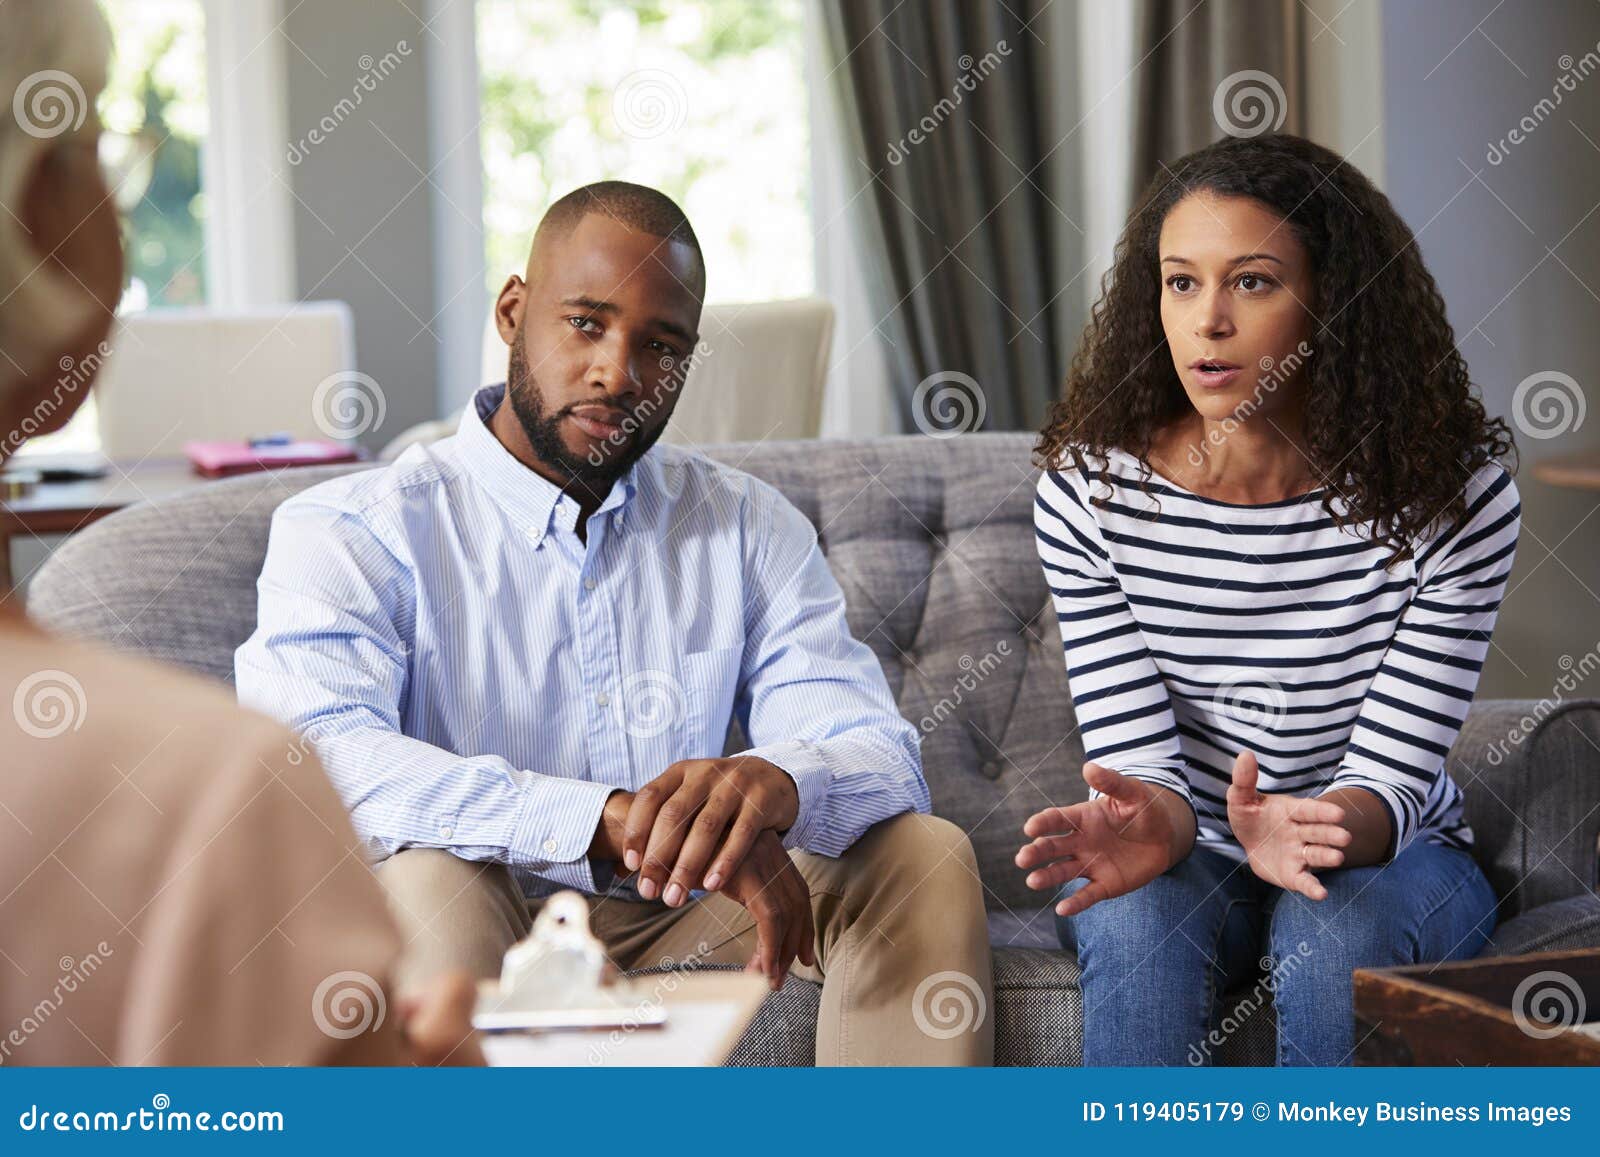 young couple having marriage counselling